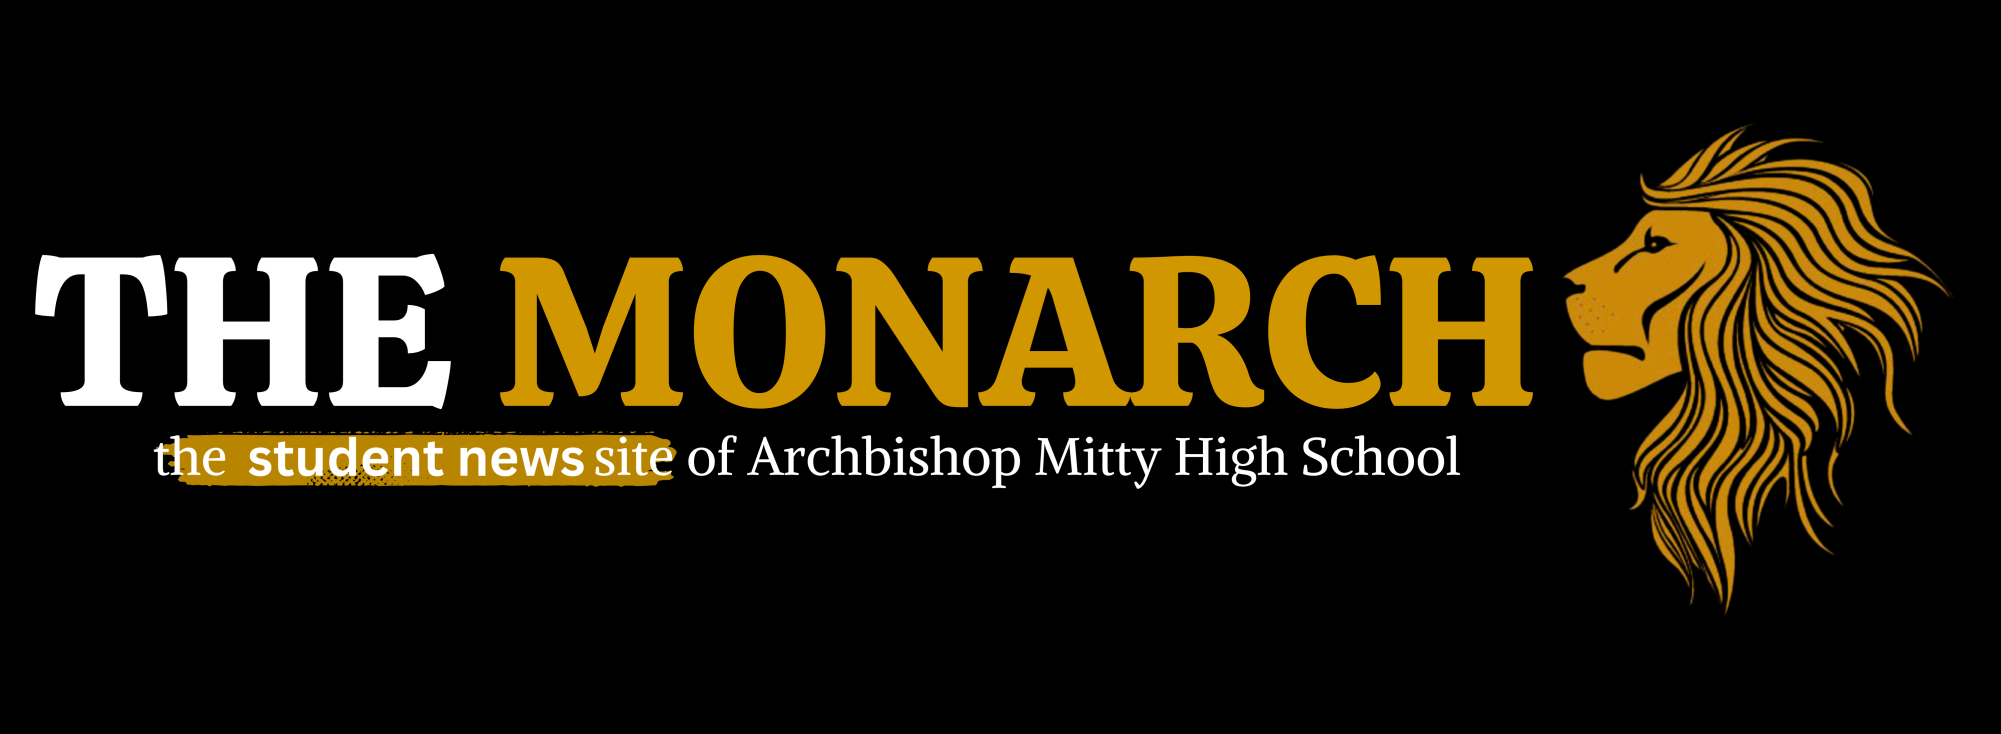 The Student News Site of Archbishop Mitty High School